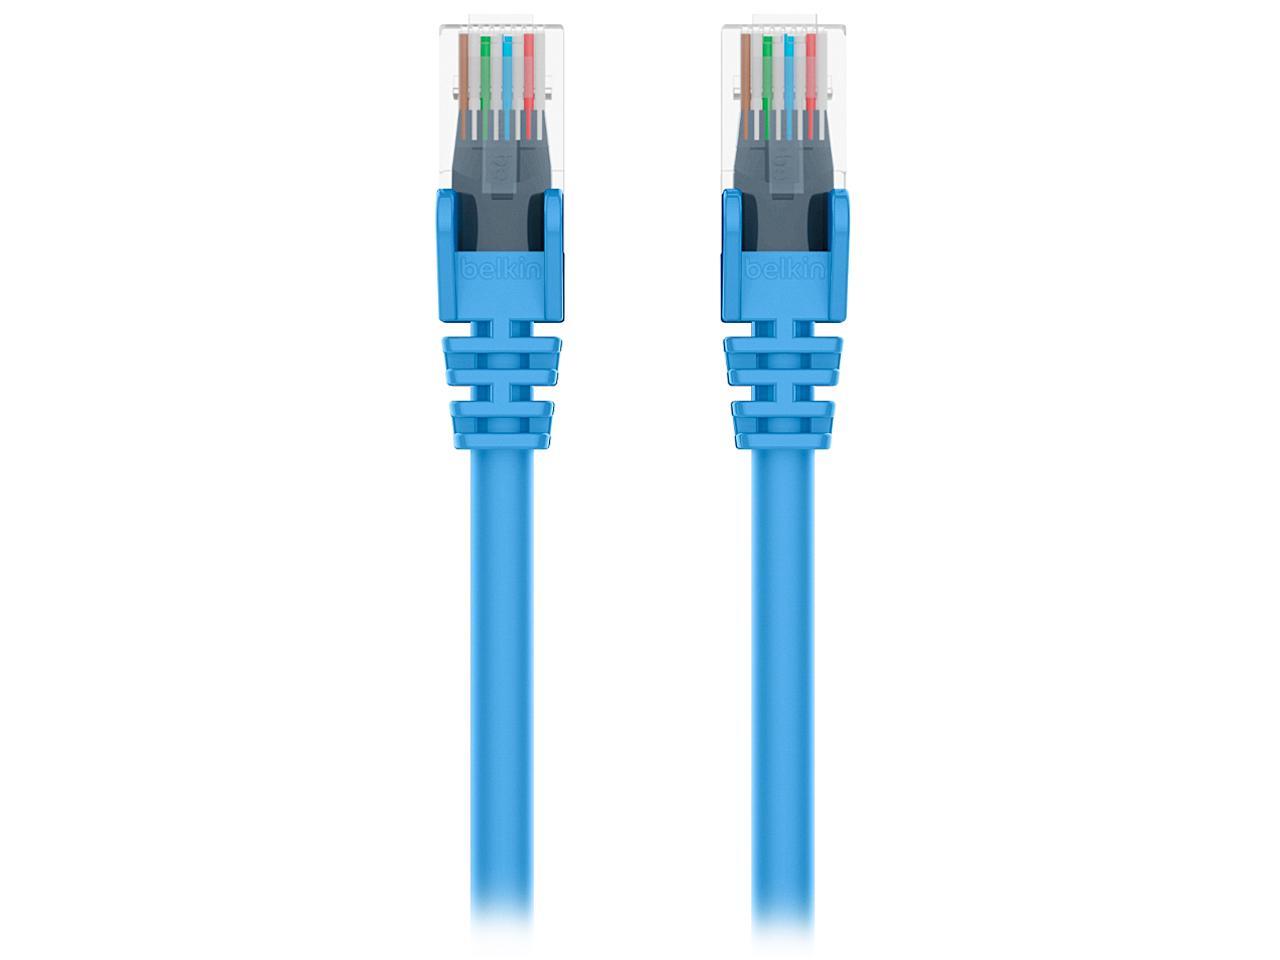 Belkin A3L980-75-BLU-S 75 ft. Cat 6 Blue Snagless Networking Cable - image 1 of 3